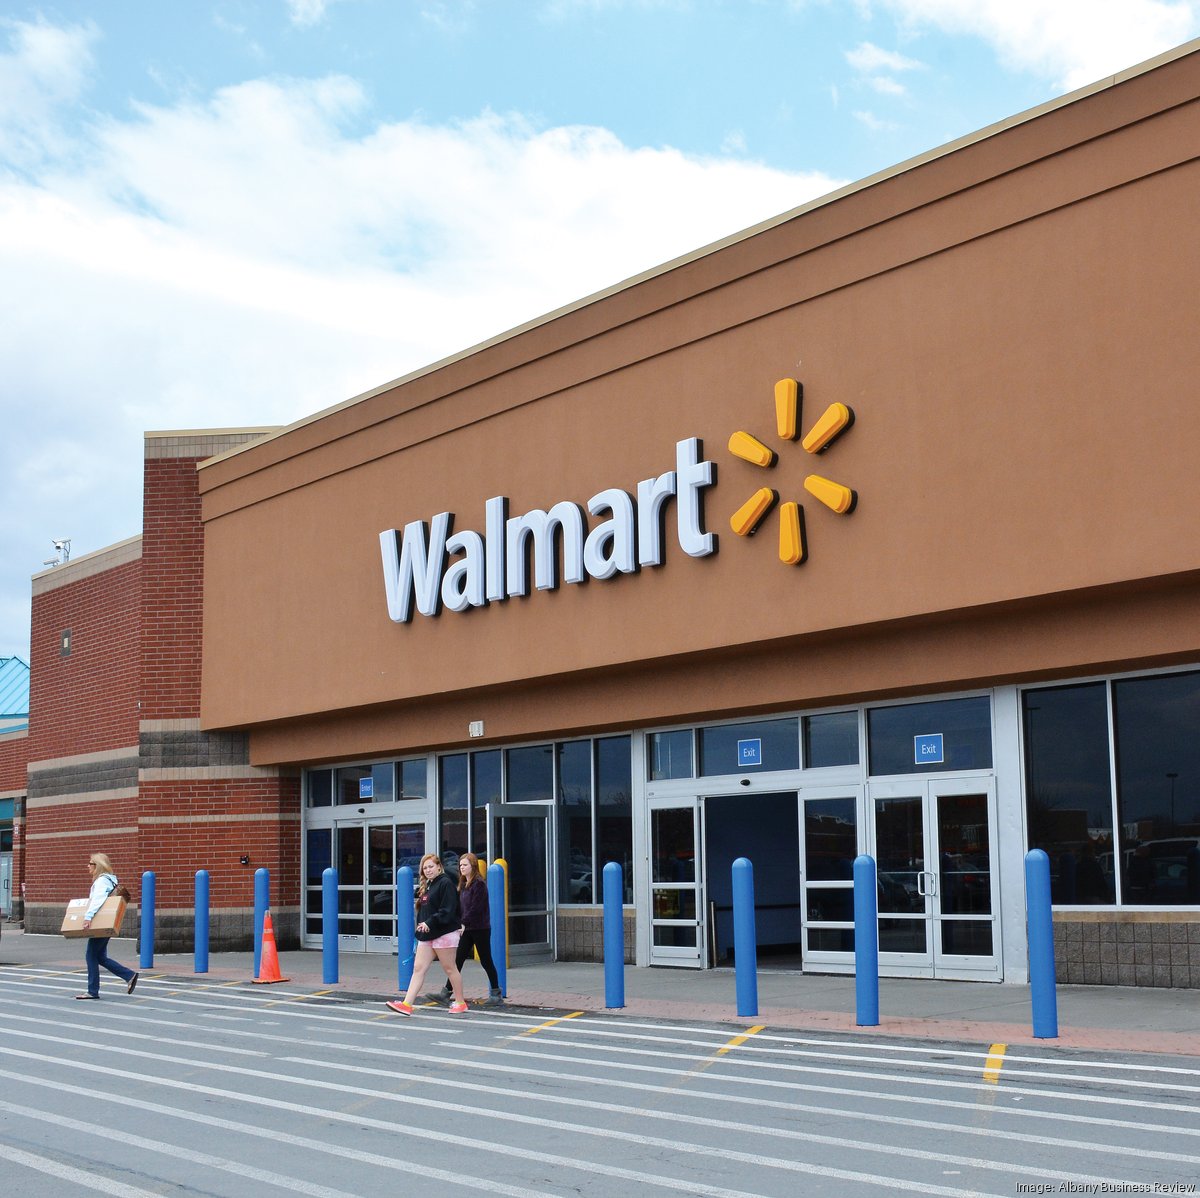 Walmart Online Grocery Delivery Launches in Orlando, Dallas